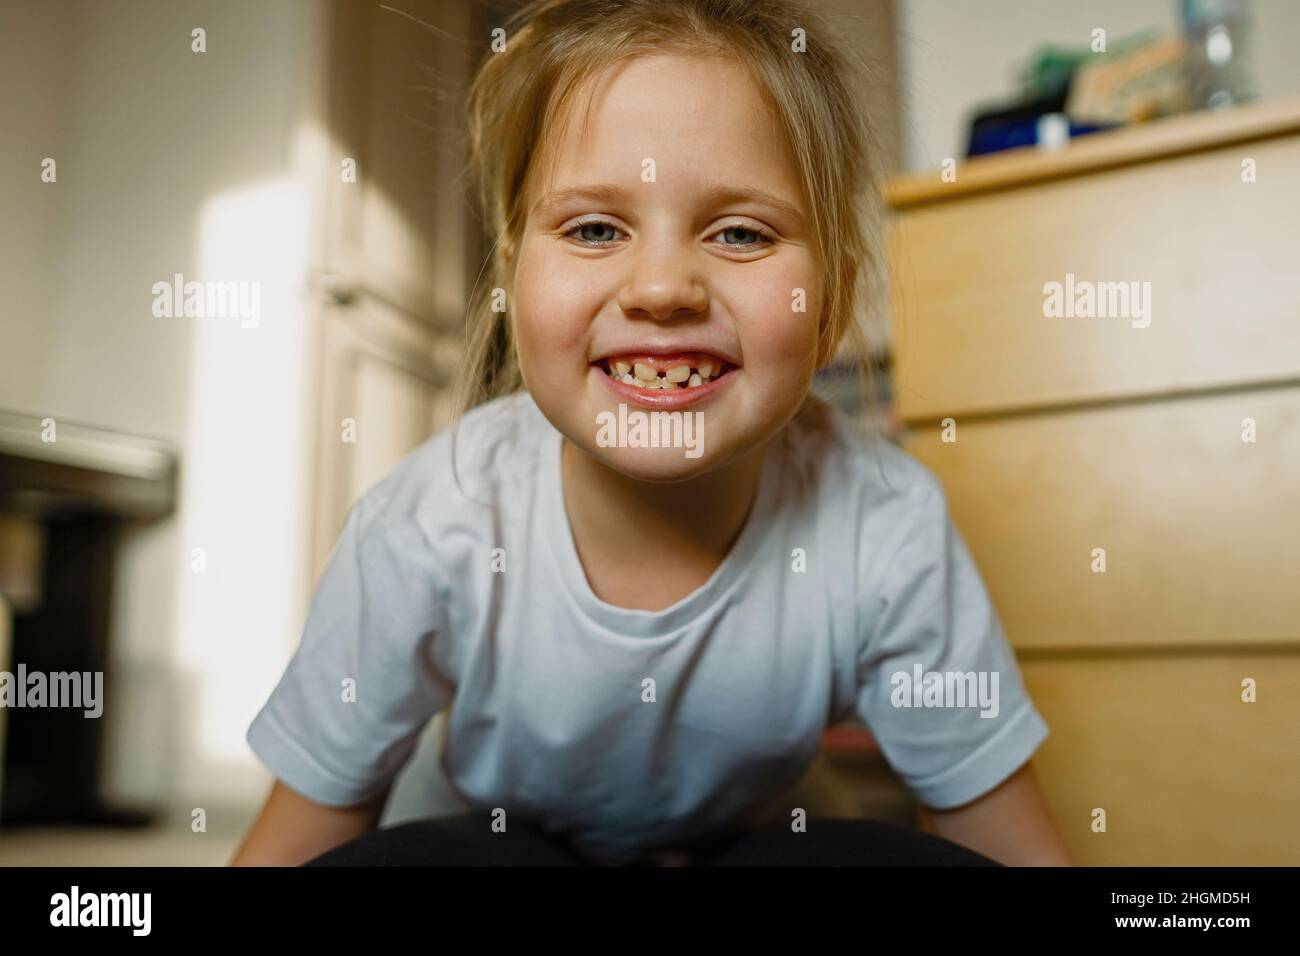 Child girl with blue eyes is having fun at home on floor, looking straight in camera. Stock Photo